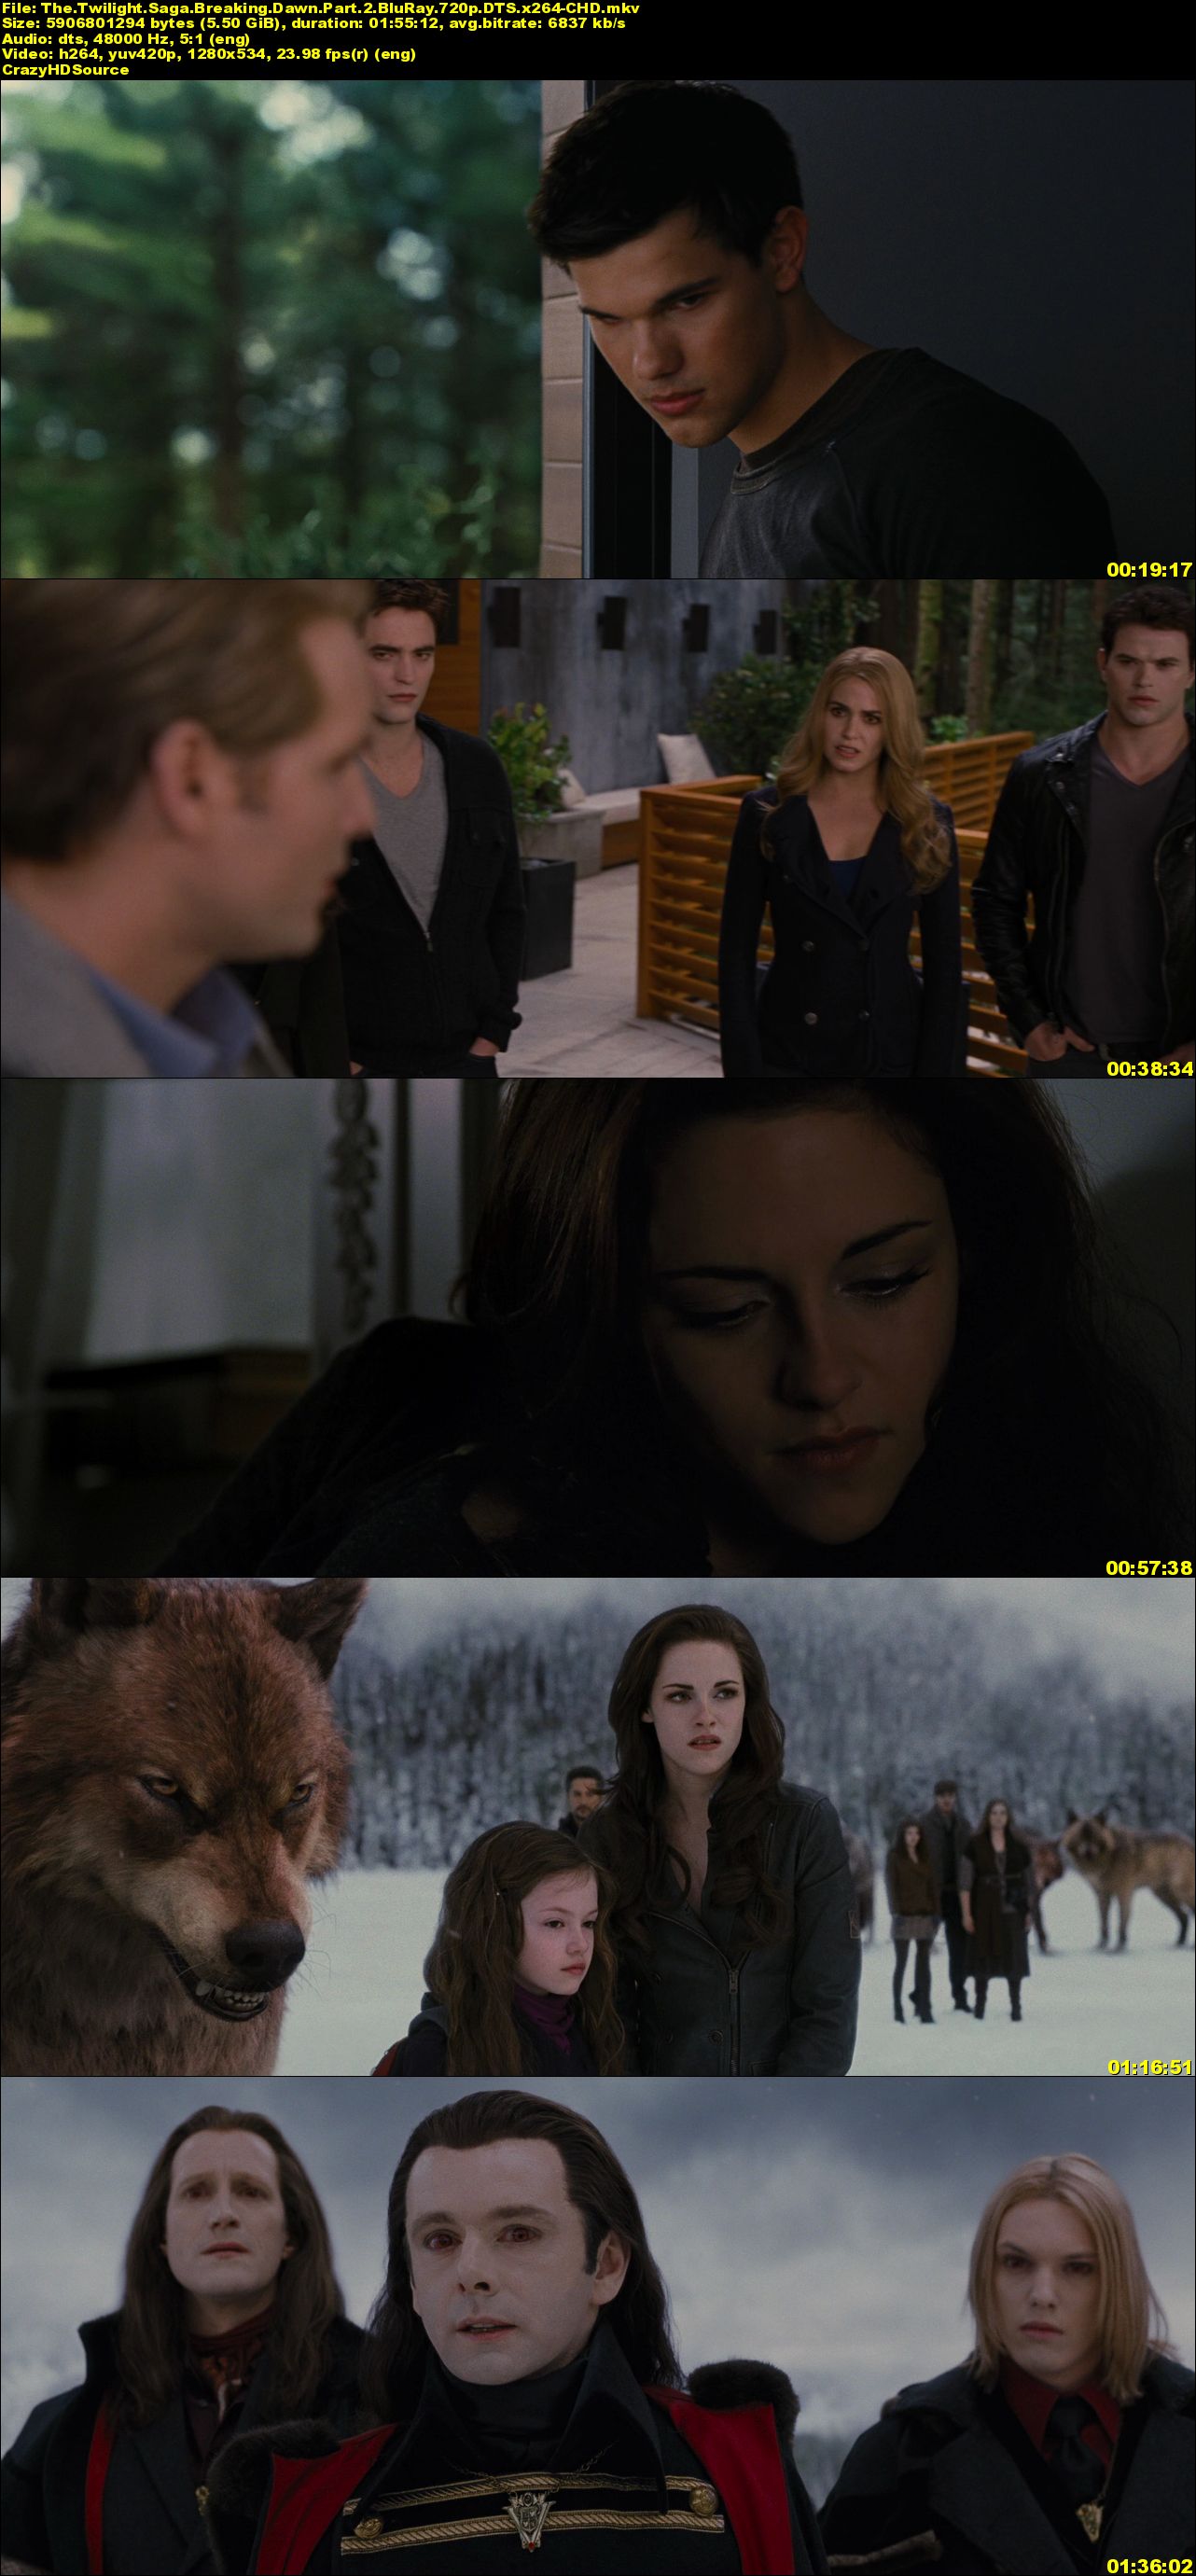 for android instal The Twilight Saga: Breaking Dawn, Part 2